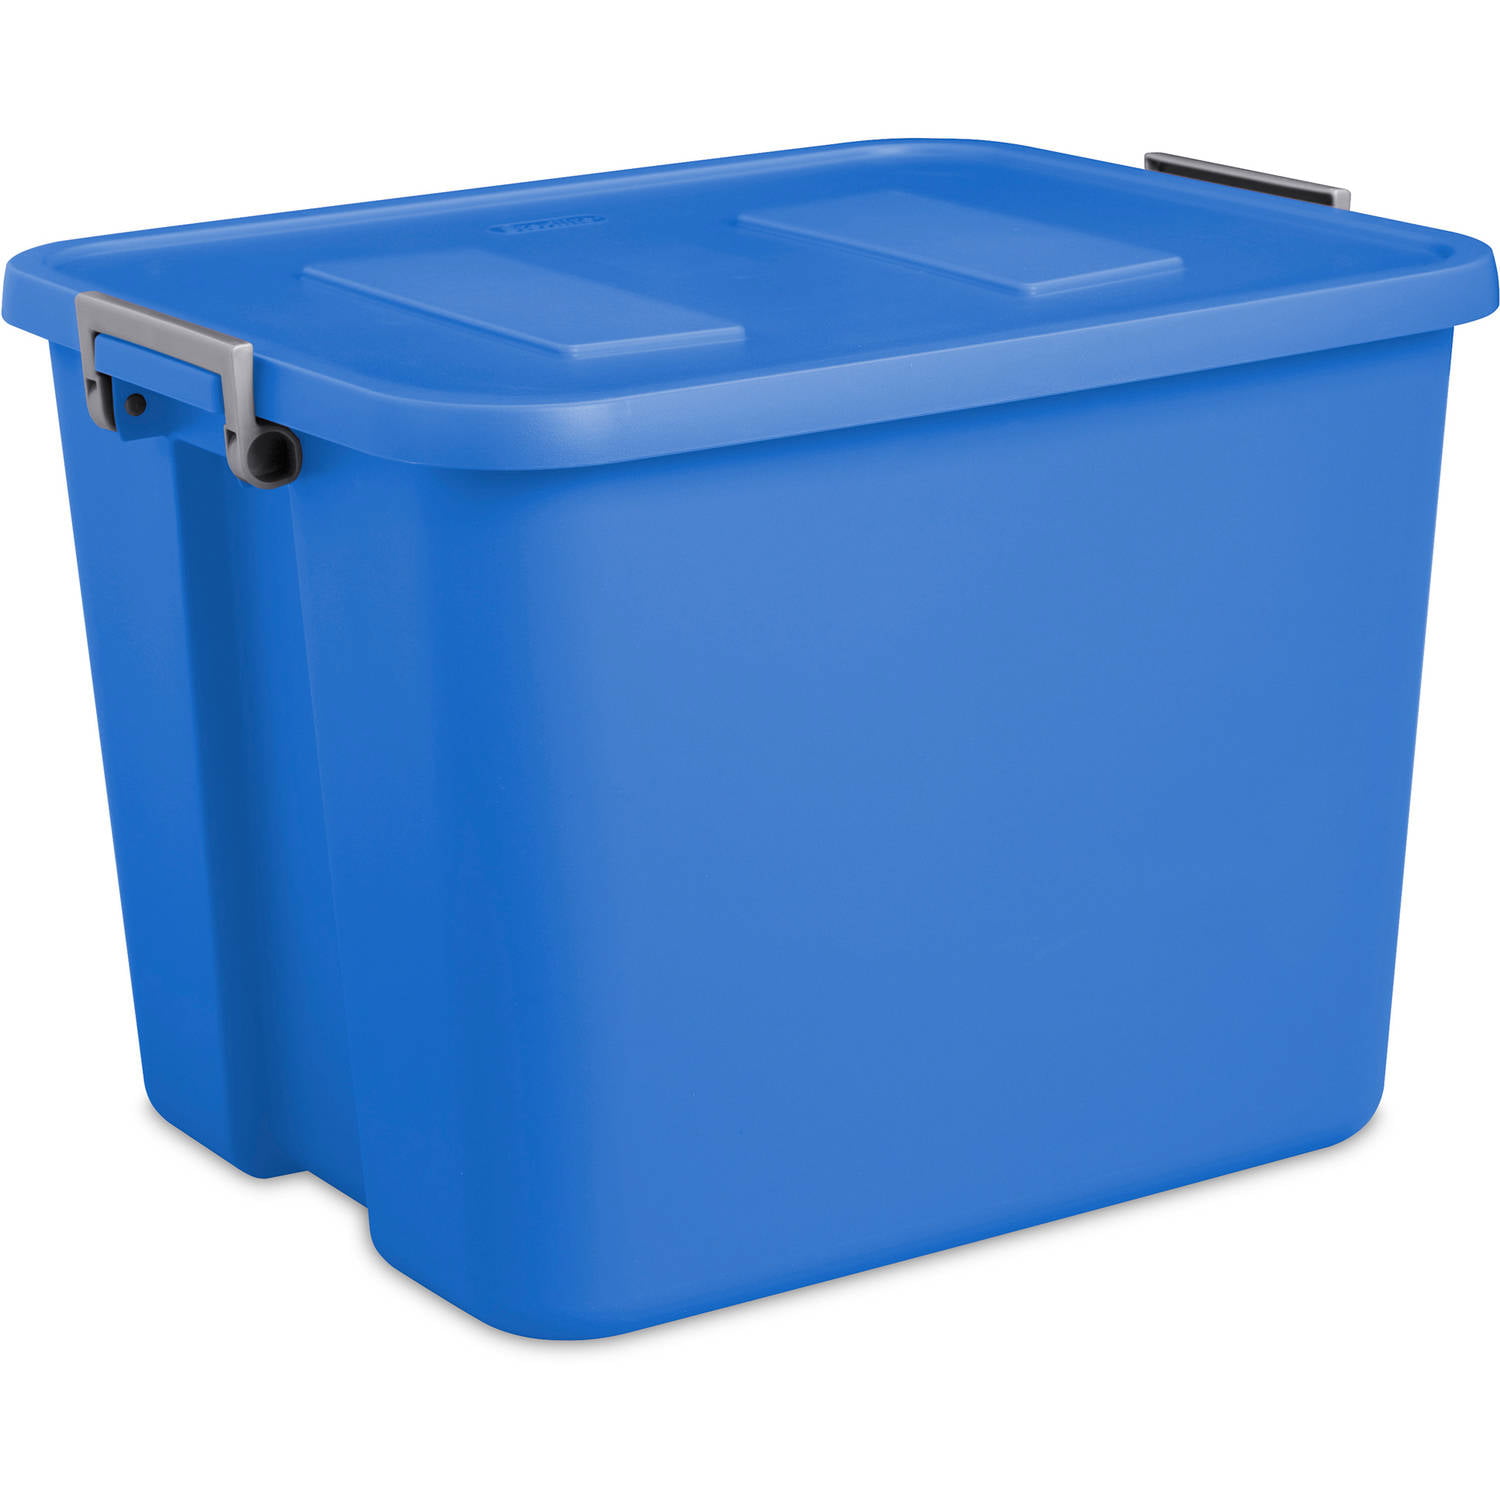 Sterilite 20 Gallon Latch Tote Turquoise Blue Available in Case of 6 